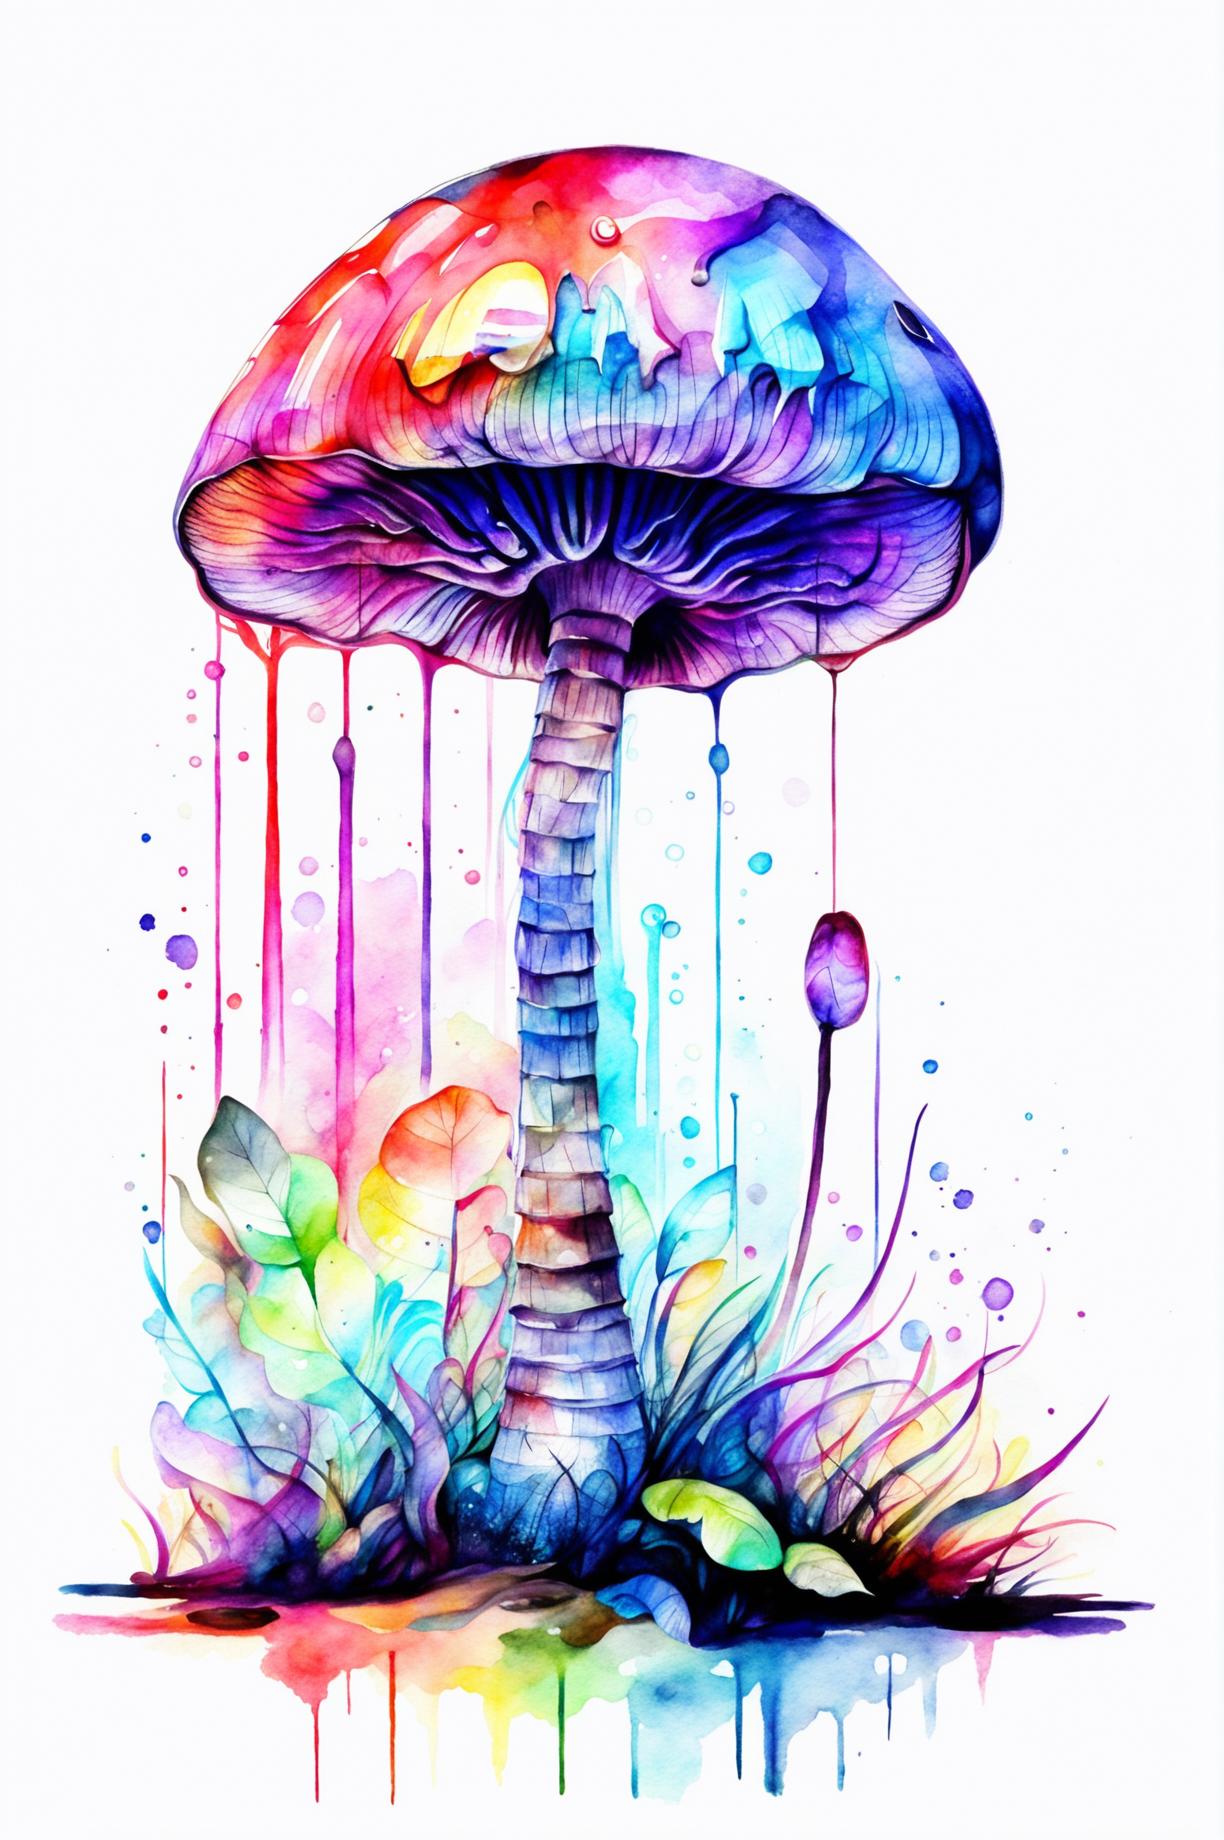 A stunning watercolor painting of a fantasy-inspired, vibrant mushroom